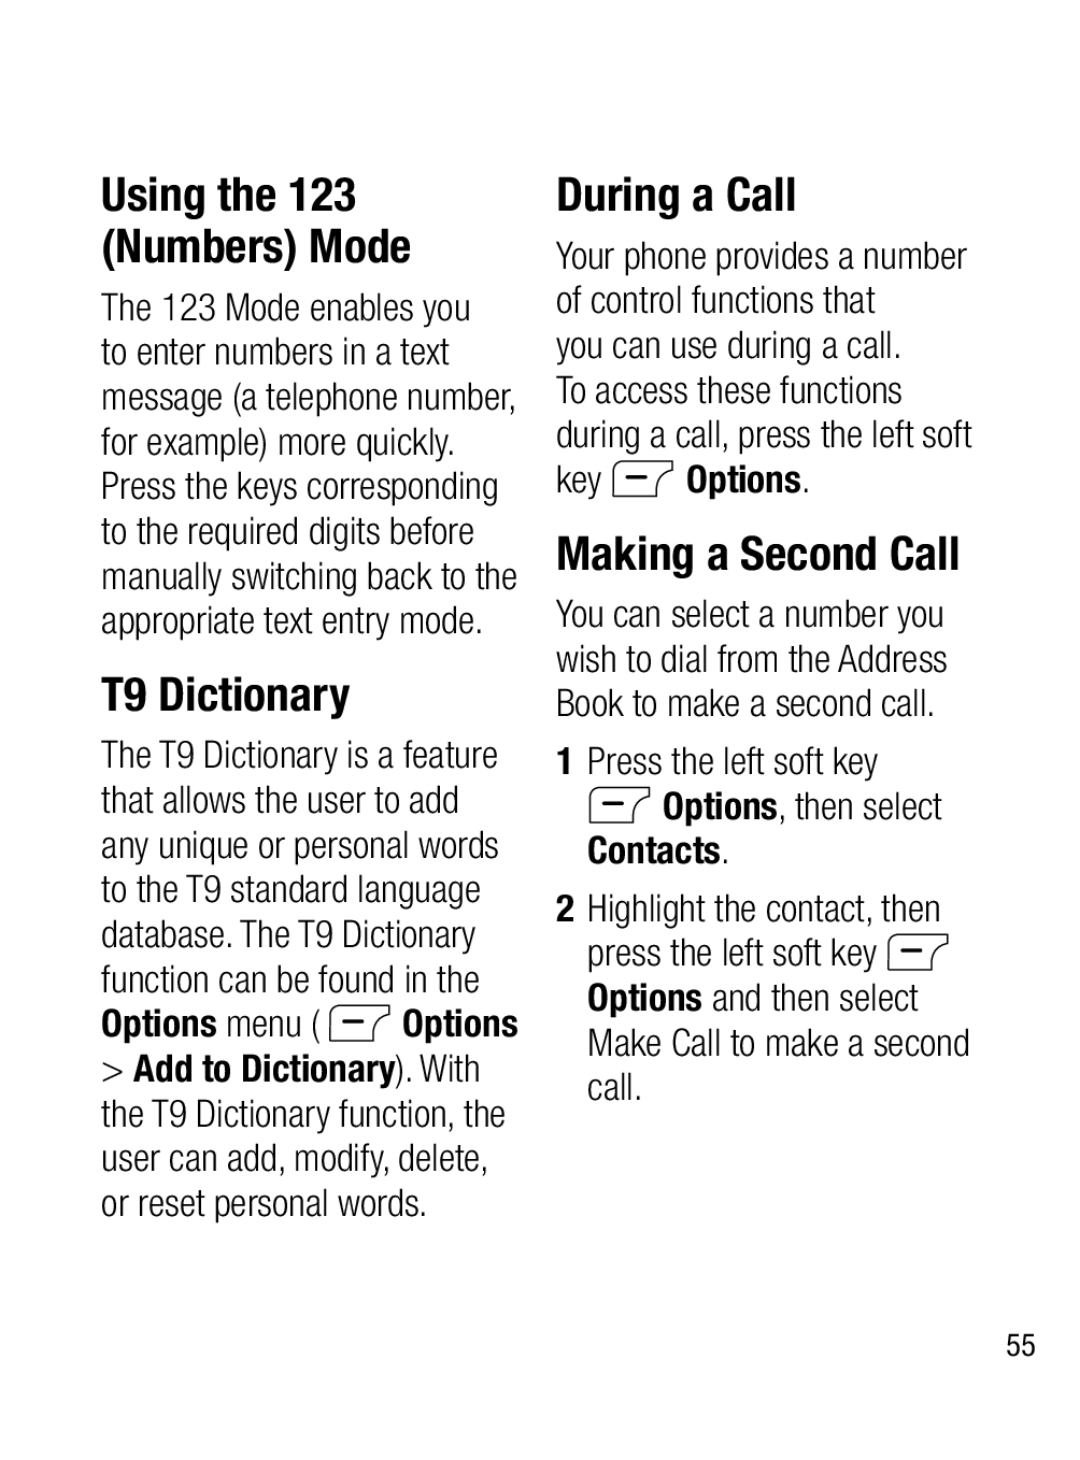 LG Electronics A133CH manual T9 Dictionary, During a Call, Making a Second Call, Using the 123 Numbers Mode, key Options 